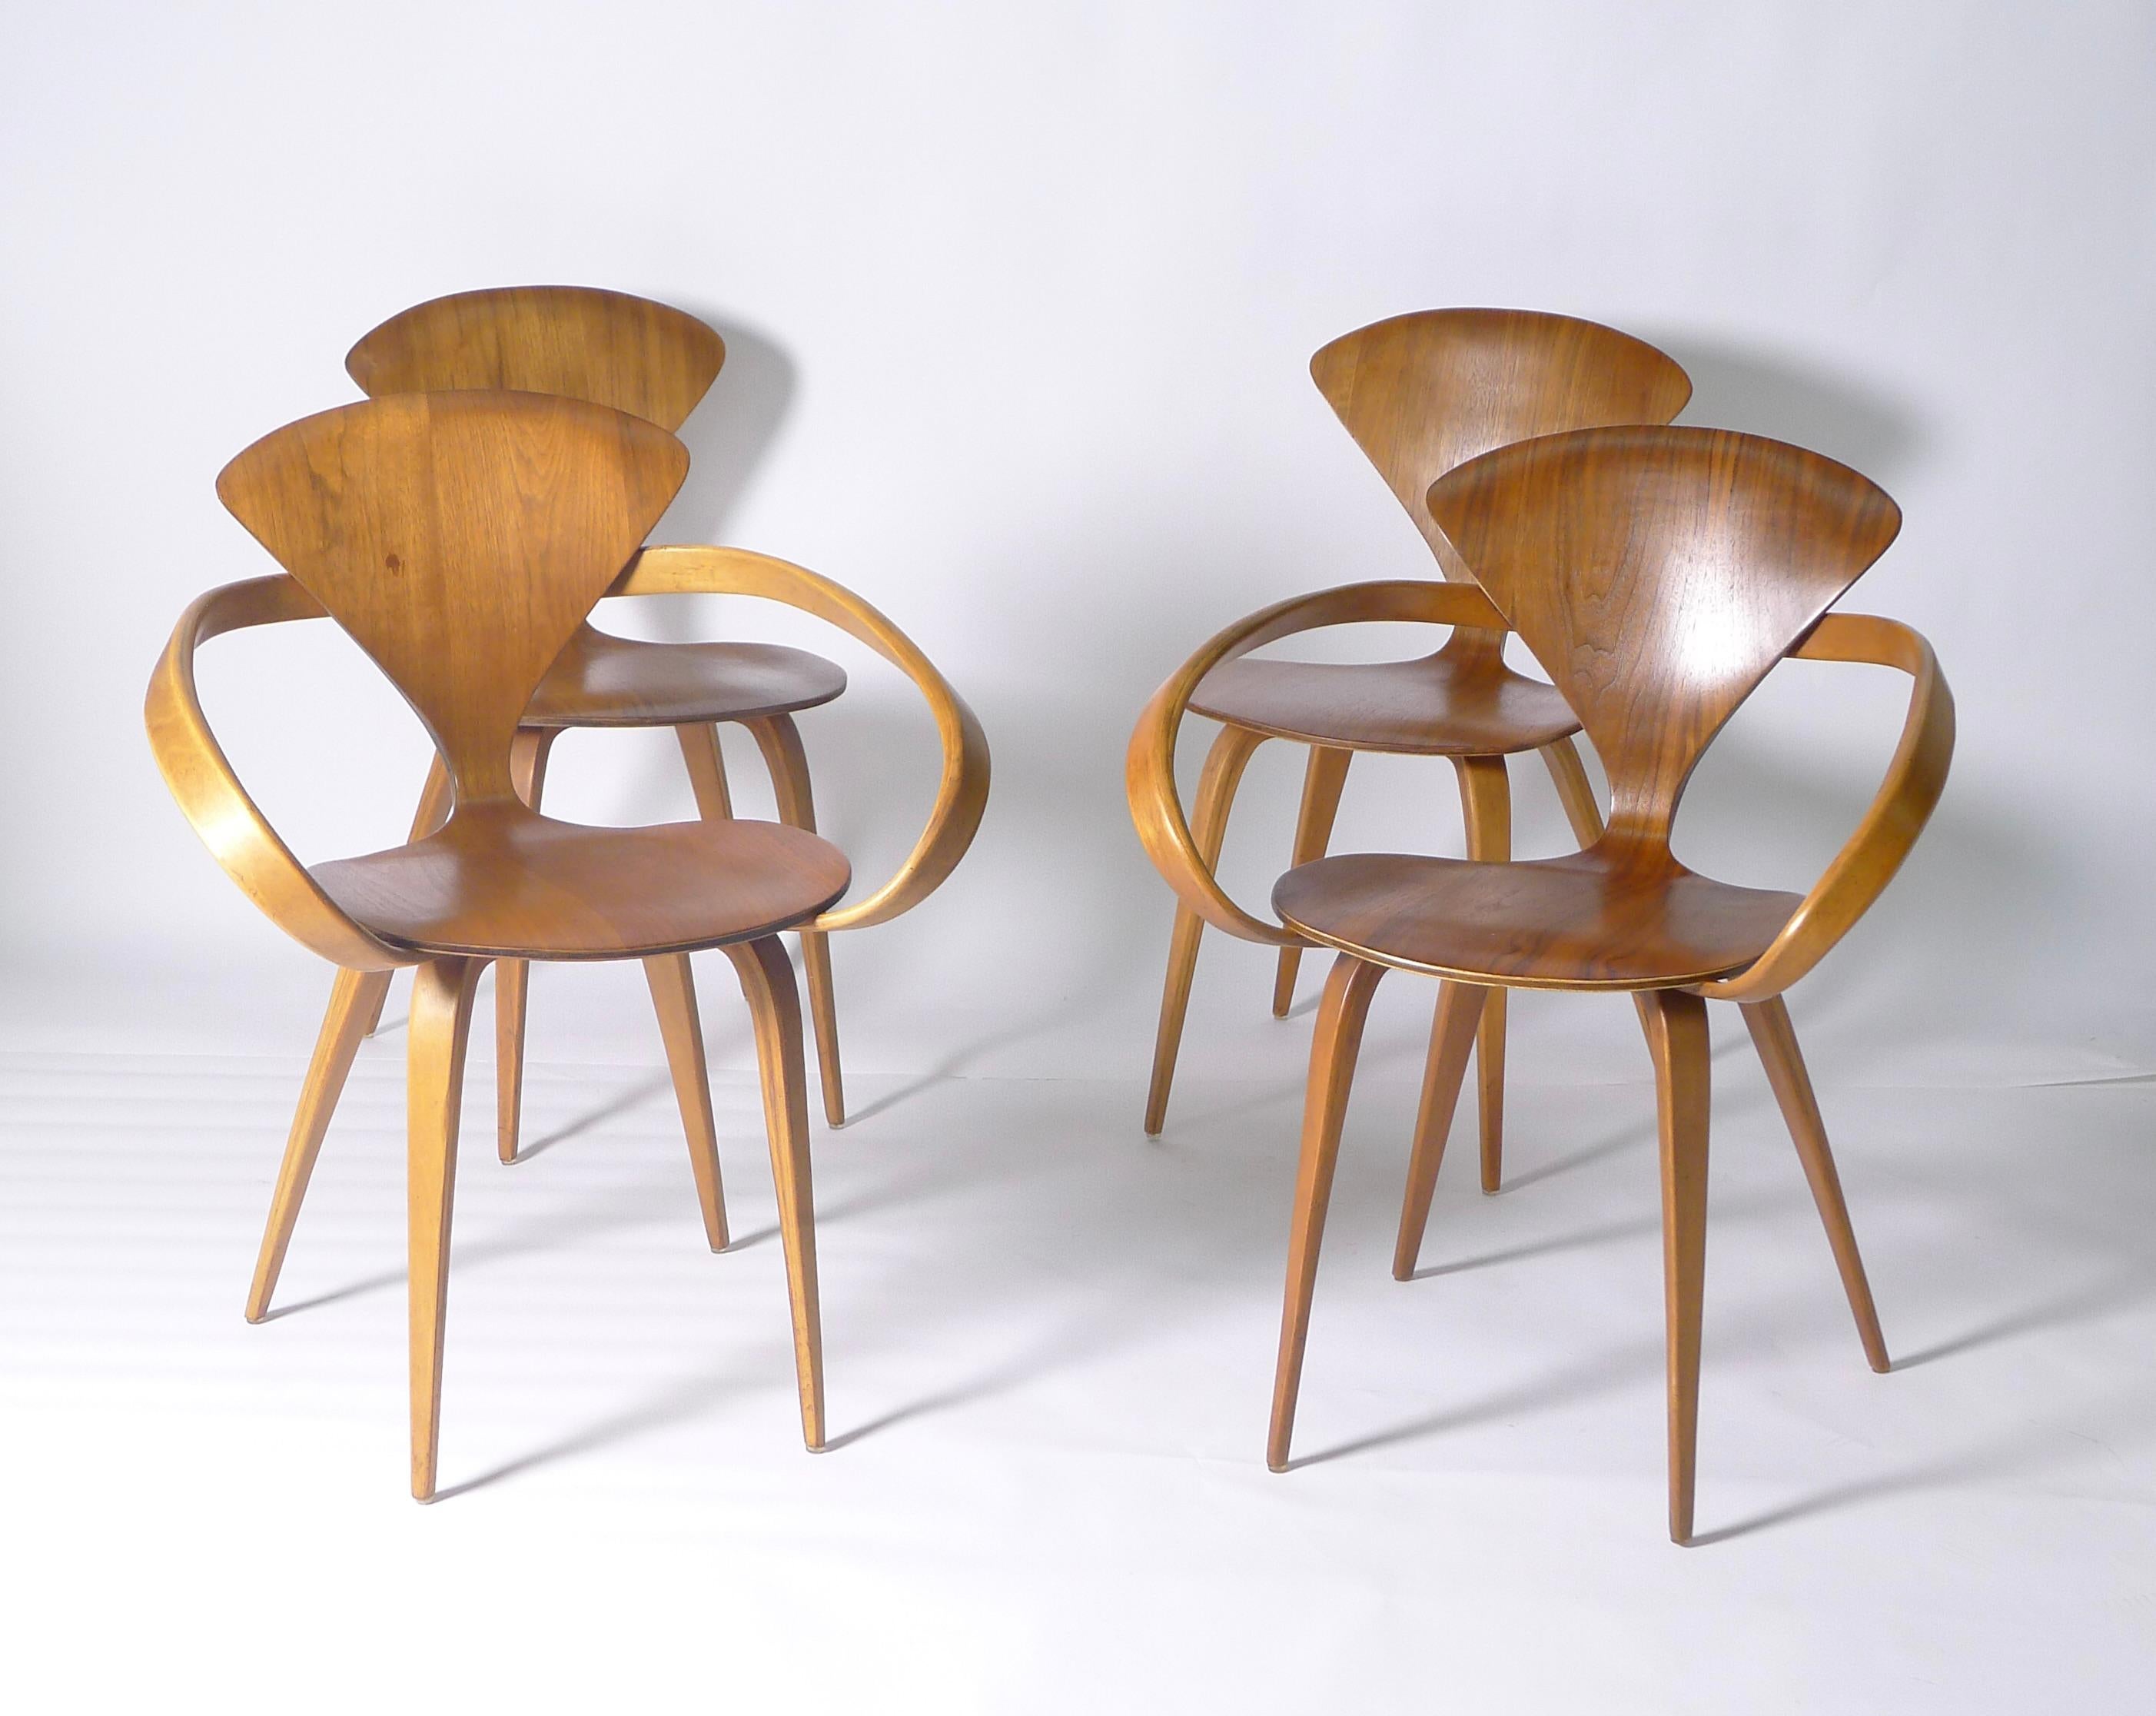 Norman Cherner's 1958 'wasp-waisted' moulded plywood chair is an icon of mid-century furniture design. 

This set of eight original Norman Cherner dining chairs, was made by Plycraft, USA, in the late 1950s, and comprises six single chairs and two